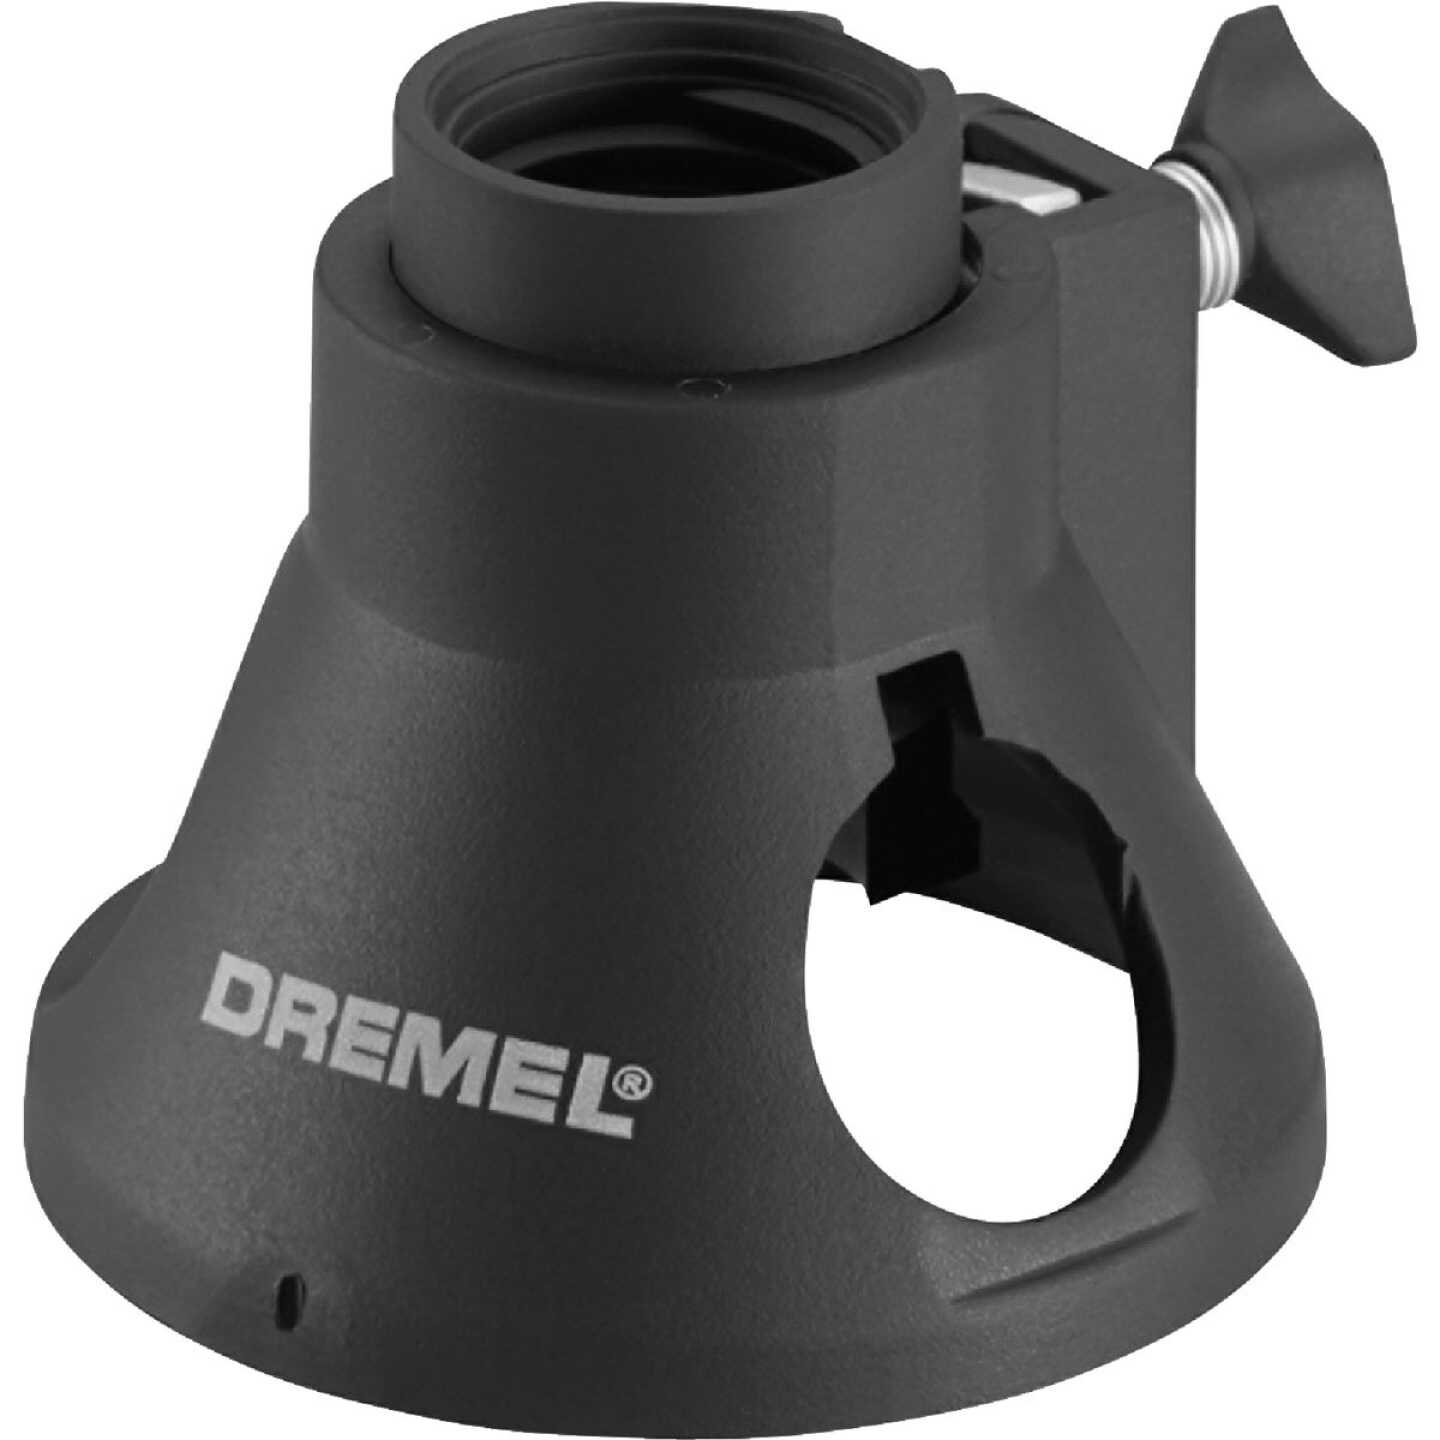 Dremel Tile Cutting Attachment Kit - Power Townsend Company